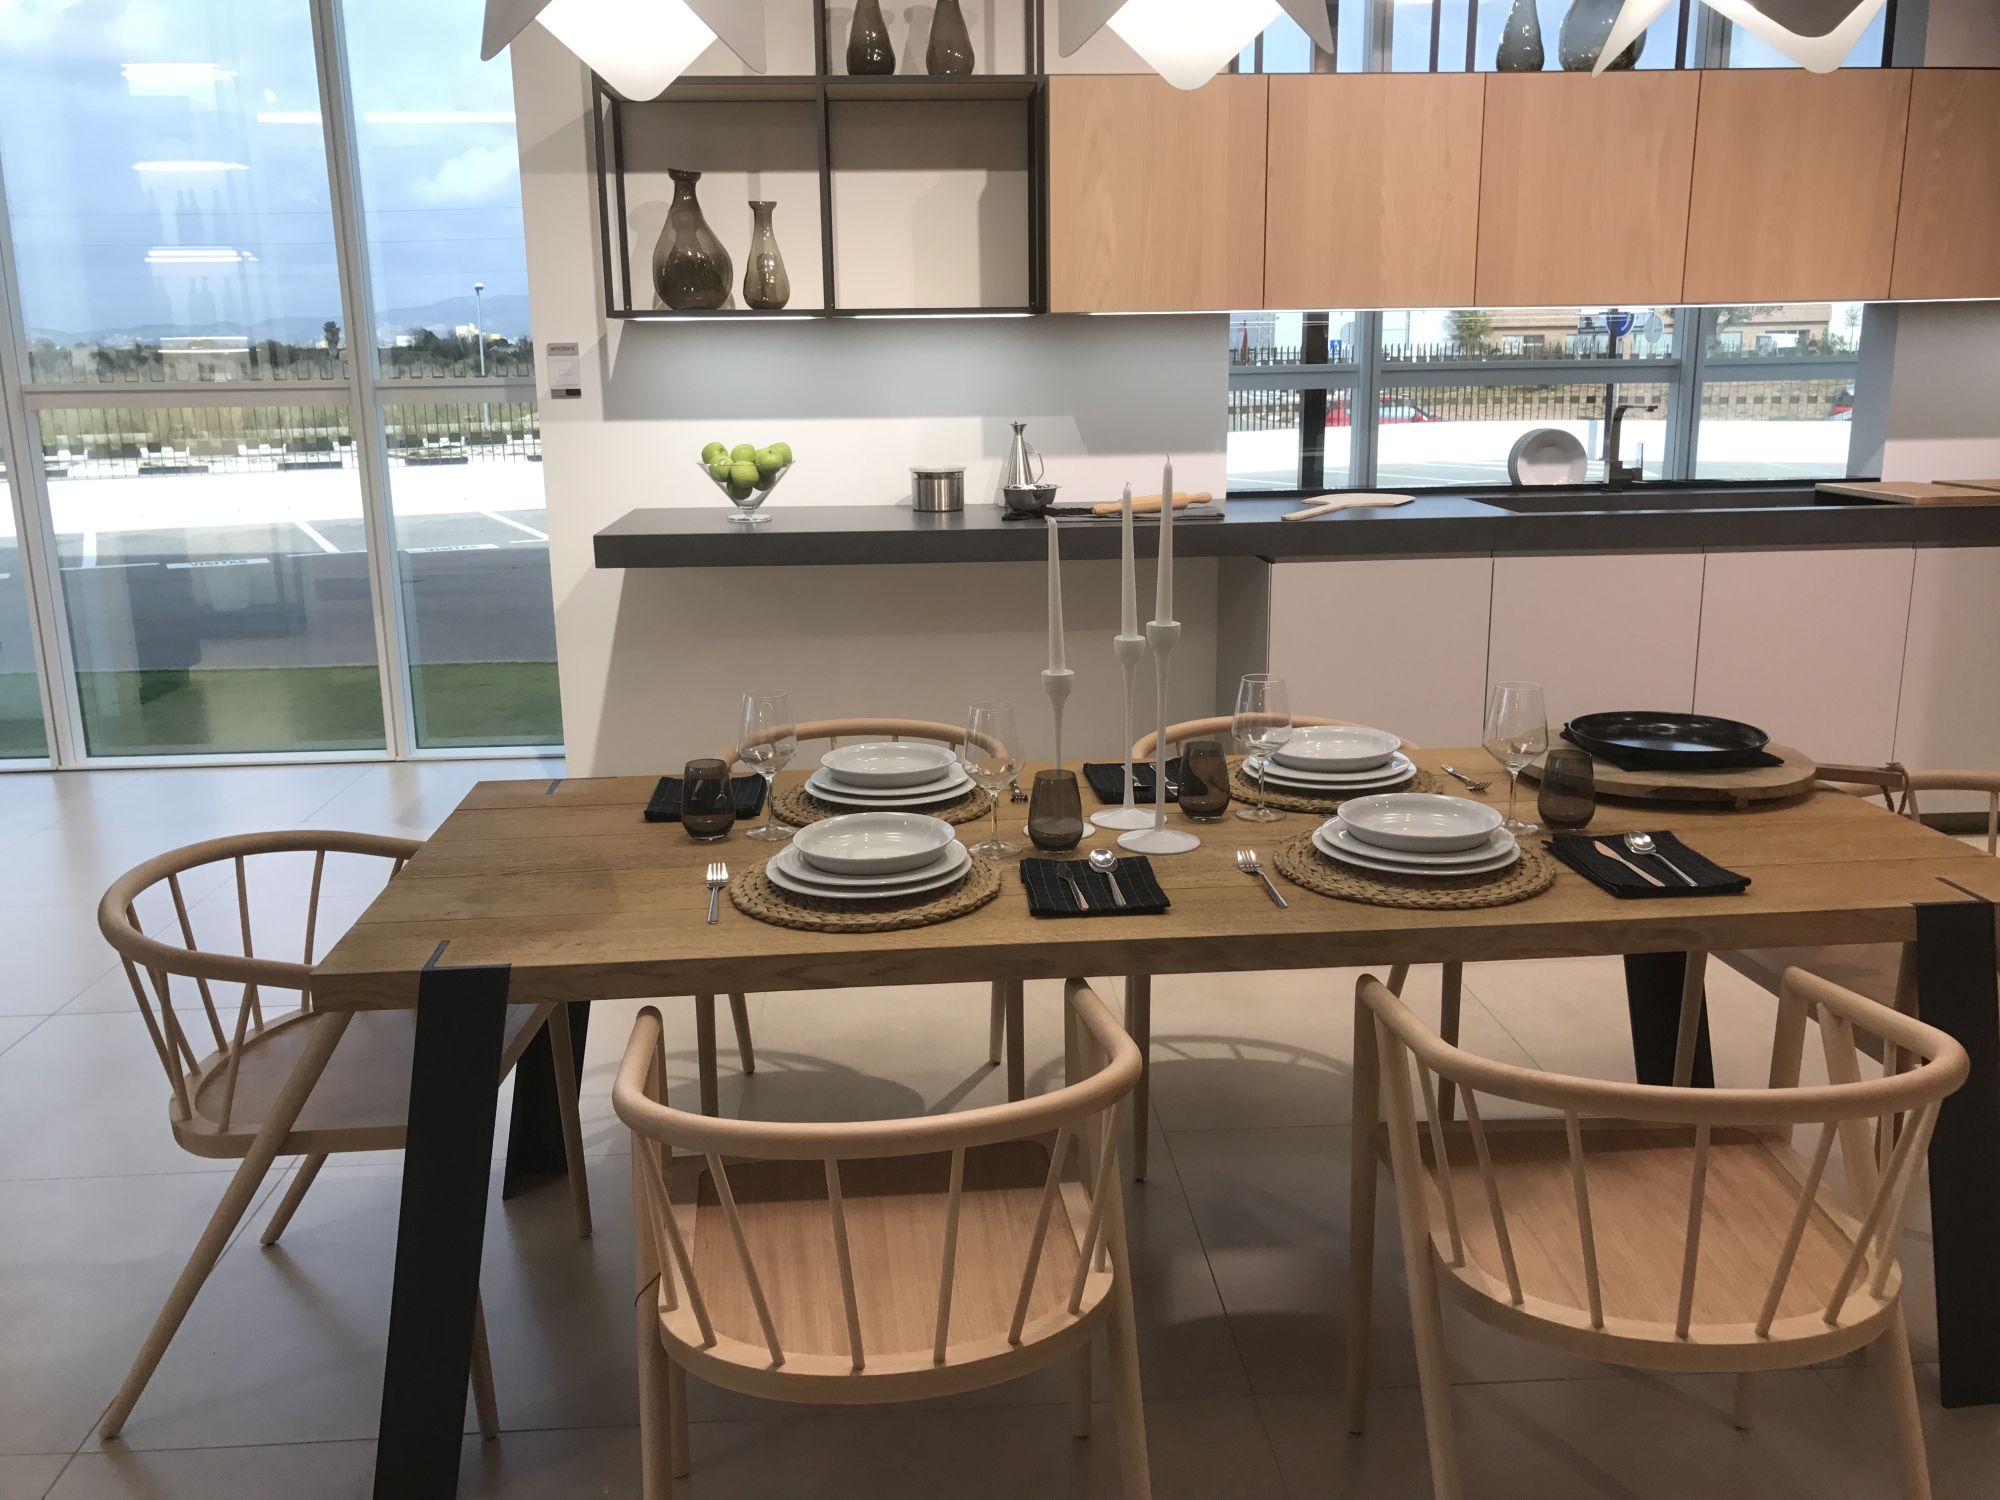 Beige modern dining area for the kitchen - GamaDecor